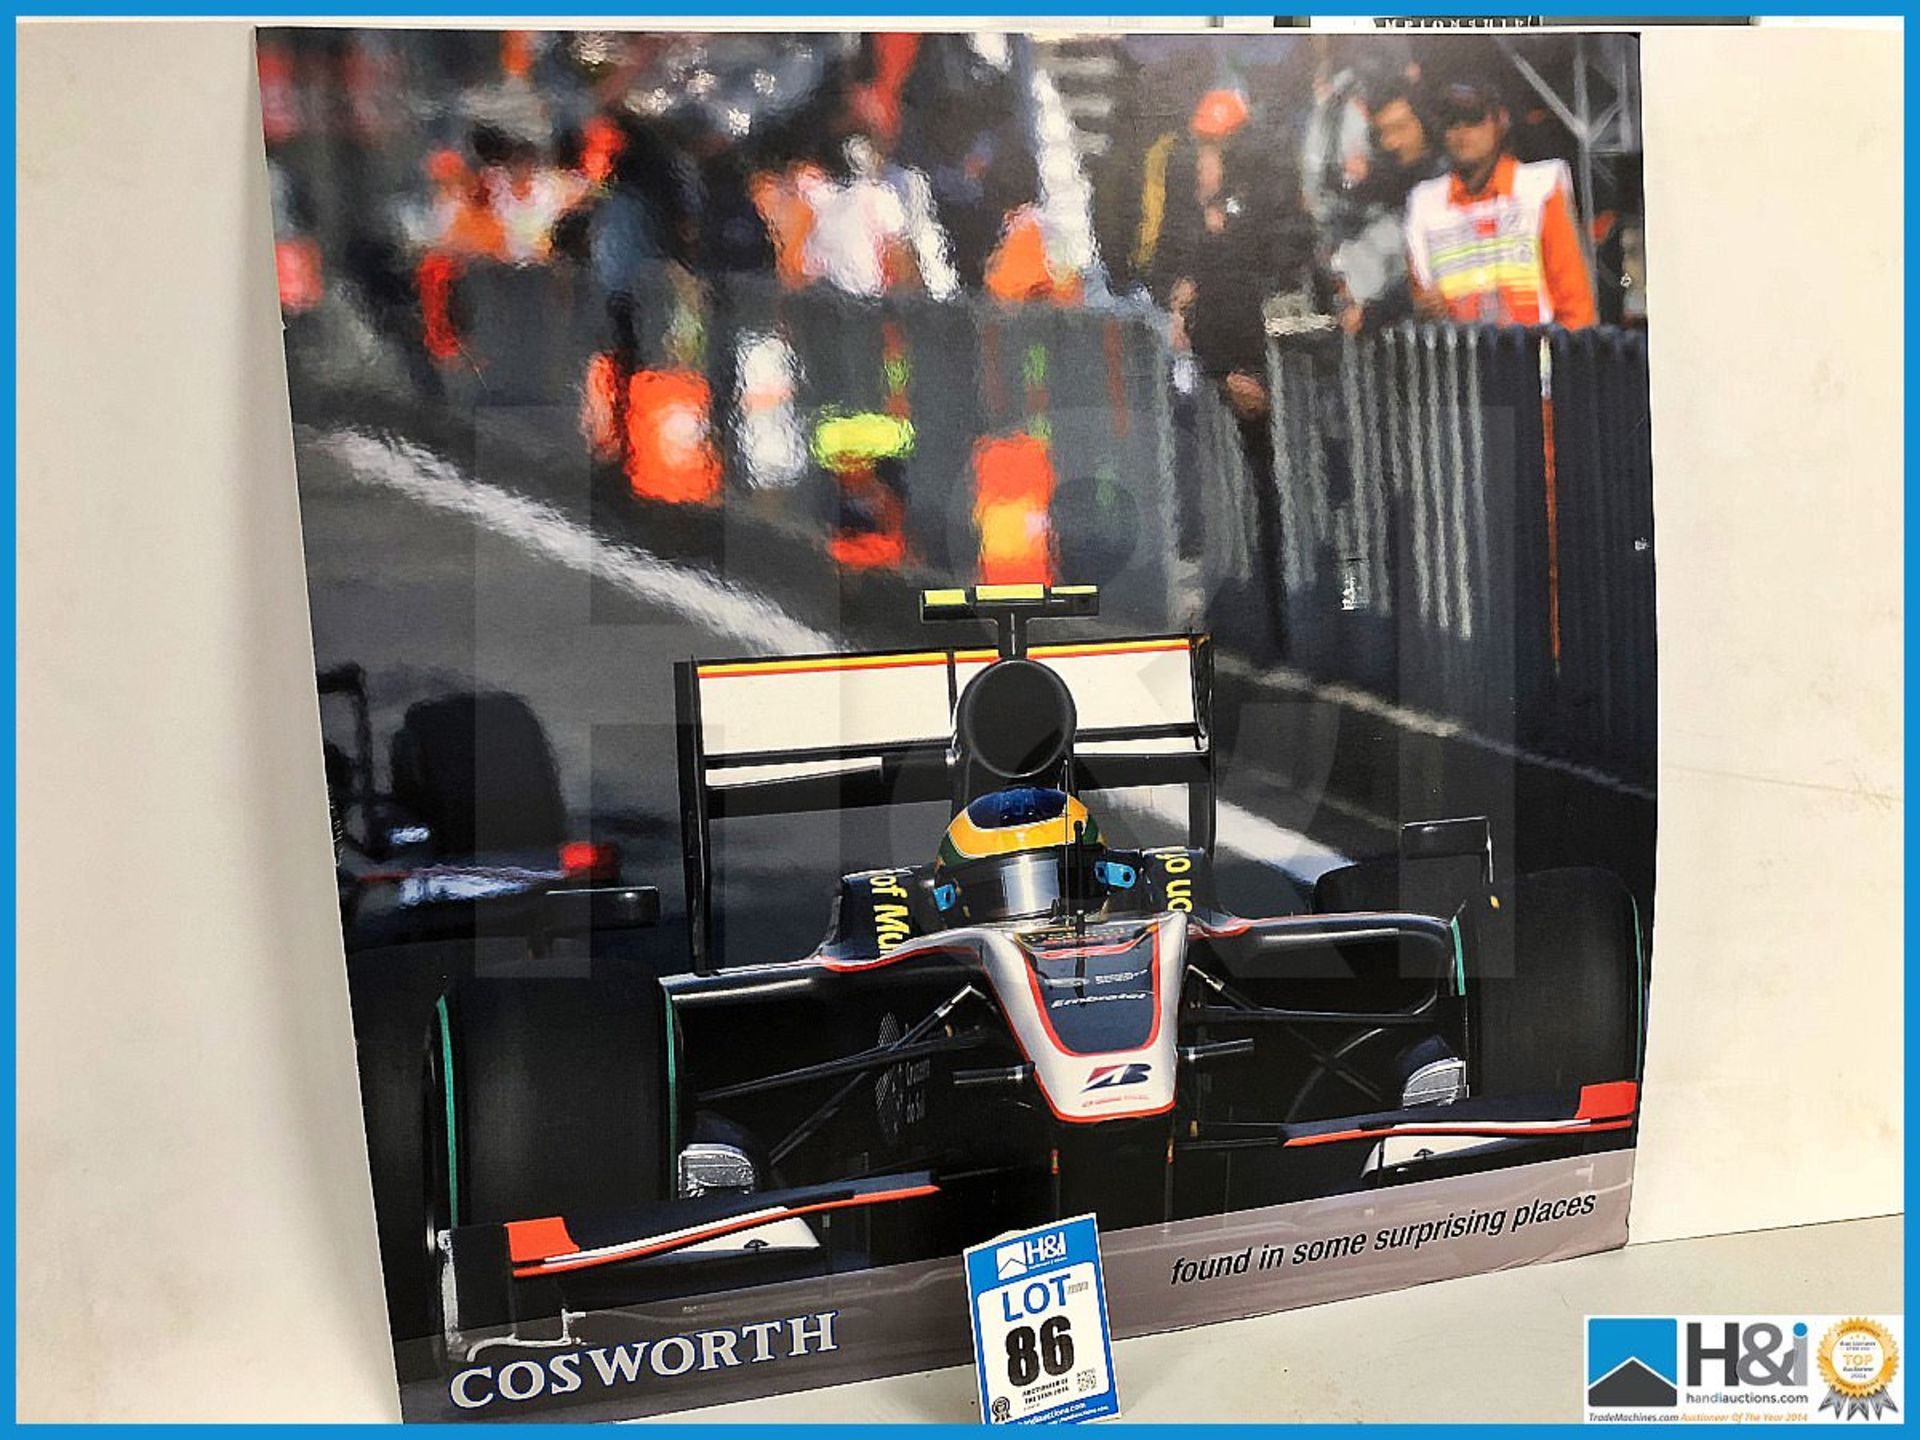 Ex Cosworth works internal promo artwork featuring F1 car backed on 39in x 39in. Mounted on card